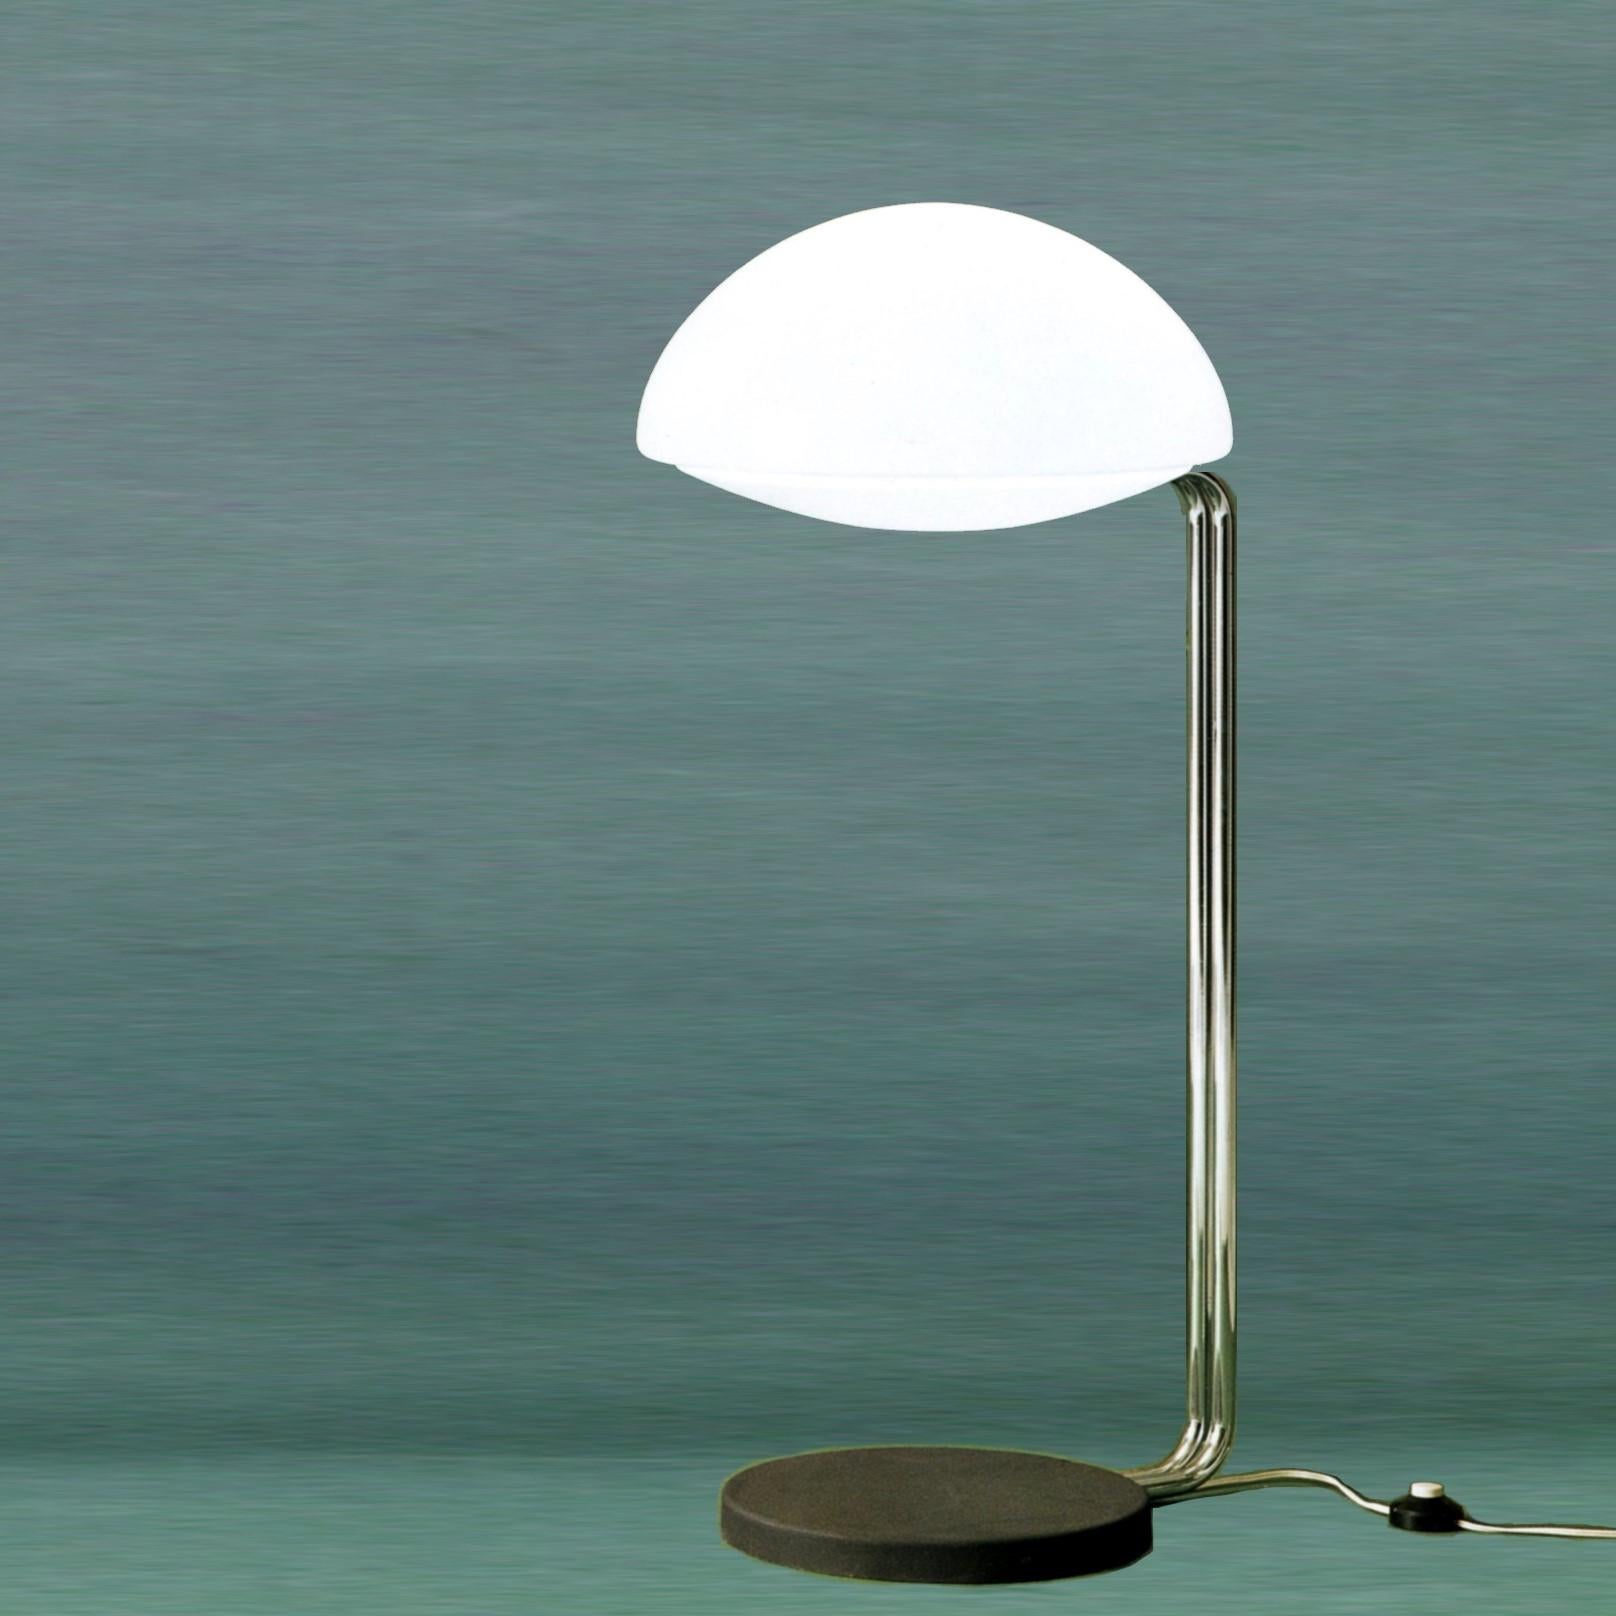 This floor lamp is a mix of traditional Italian techniques like hand blown opaline glass and a very contemporary chromed and texturized black metal base. It was manufactured in 1972 by Sormani of Arosio, Italy and was designed by G. Gentile. An